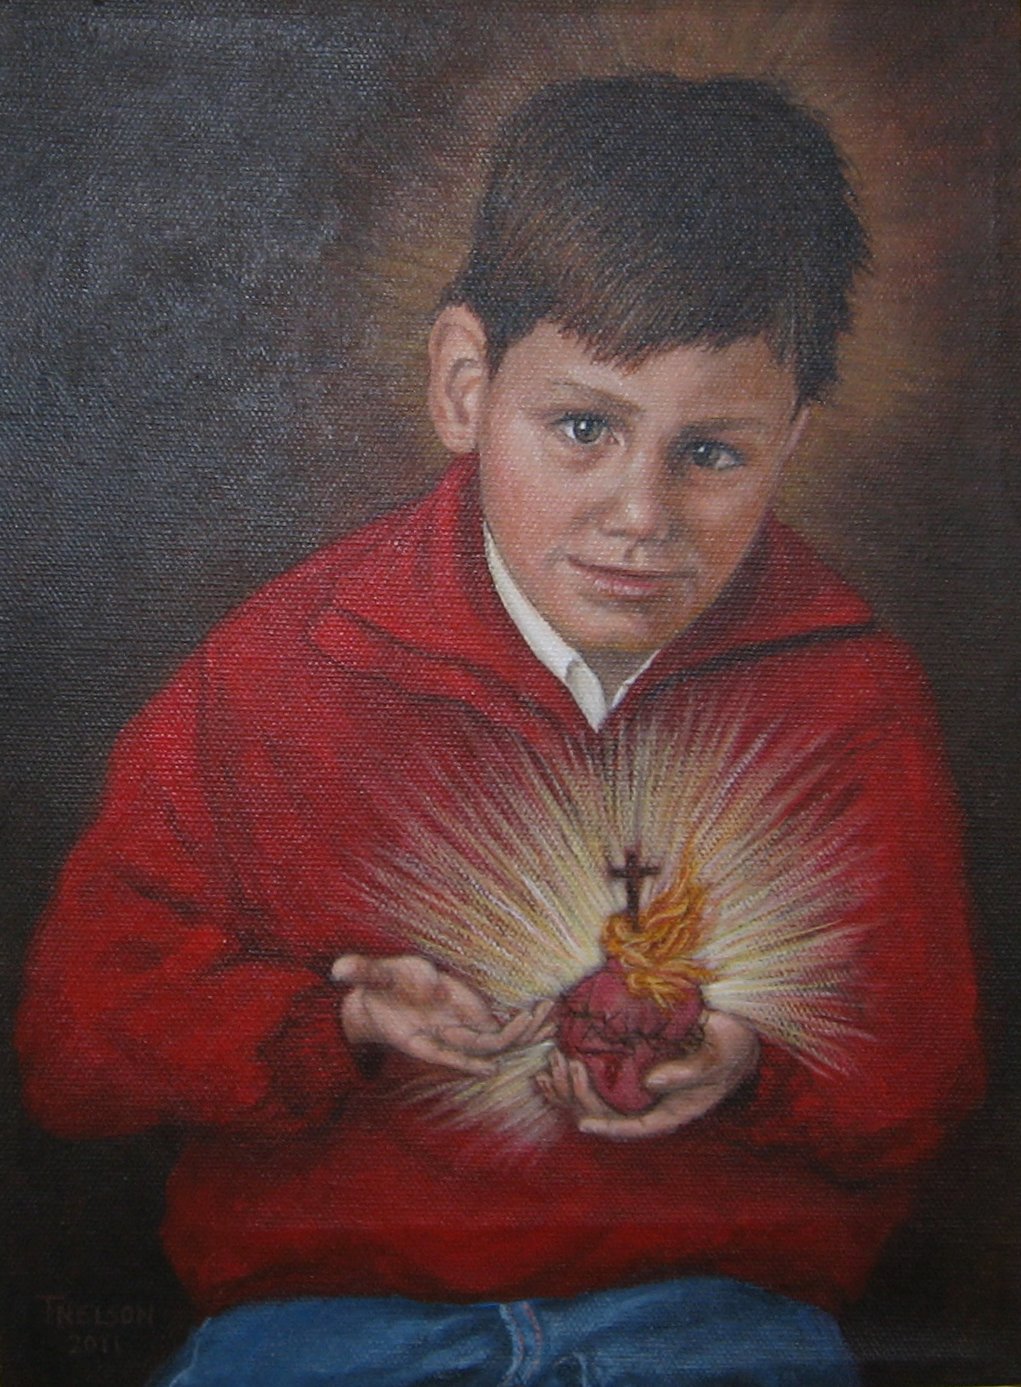 The Heart Of A Child [1920]